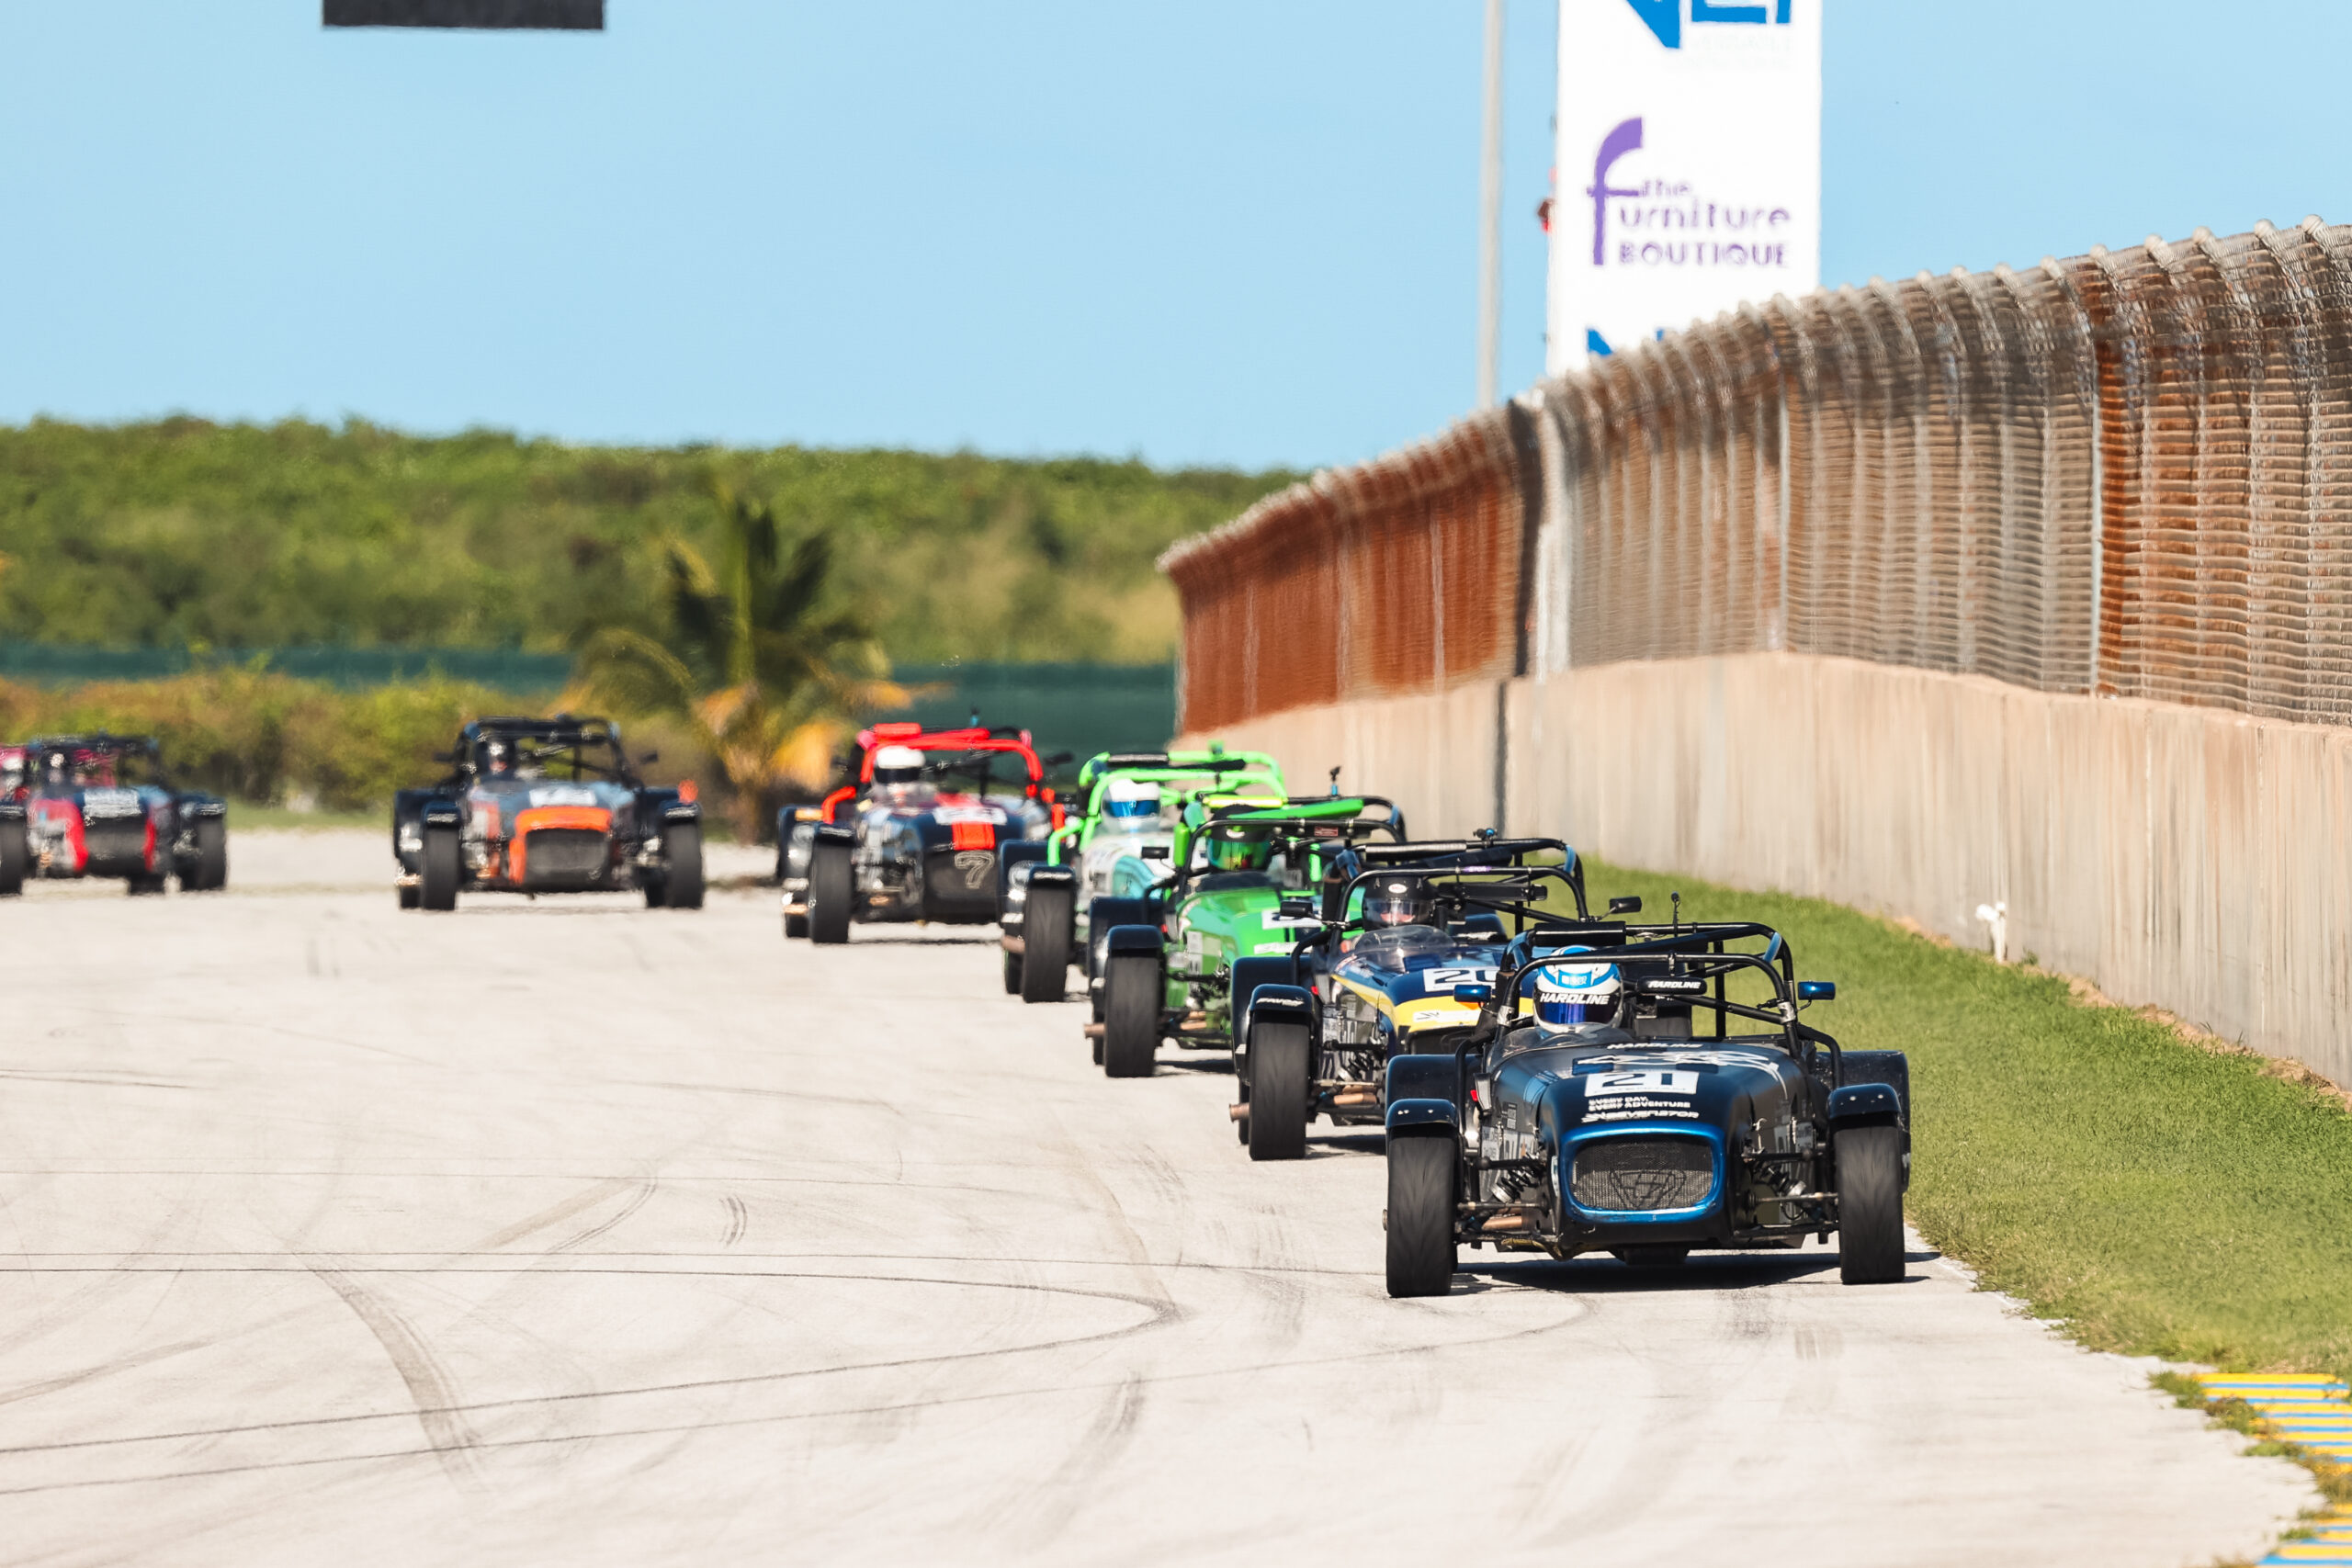 EBC-Equipped Caterham Racers Clinch Podiums in Barbados Endurance Guest Race